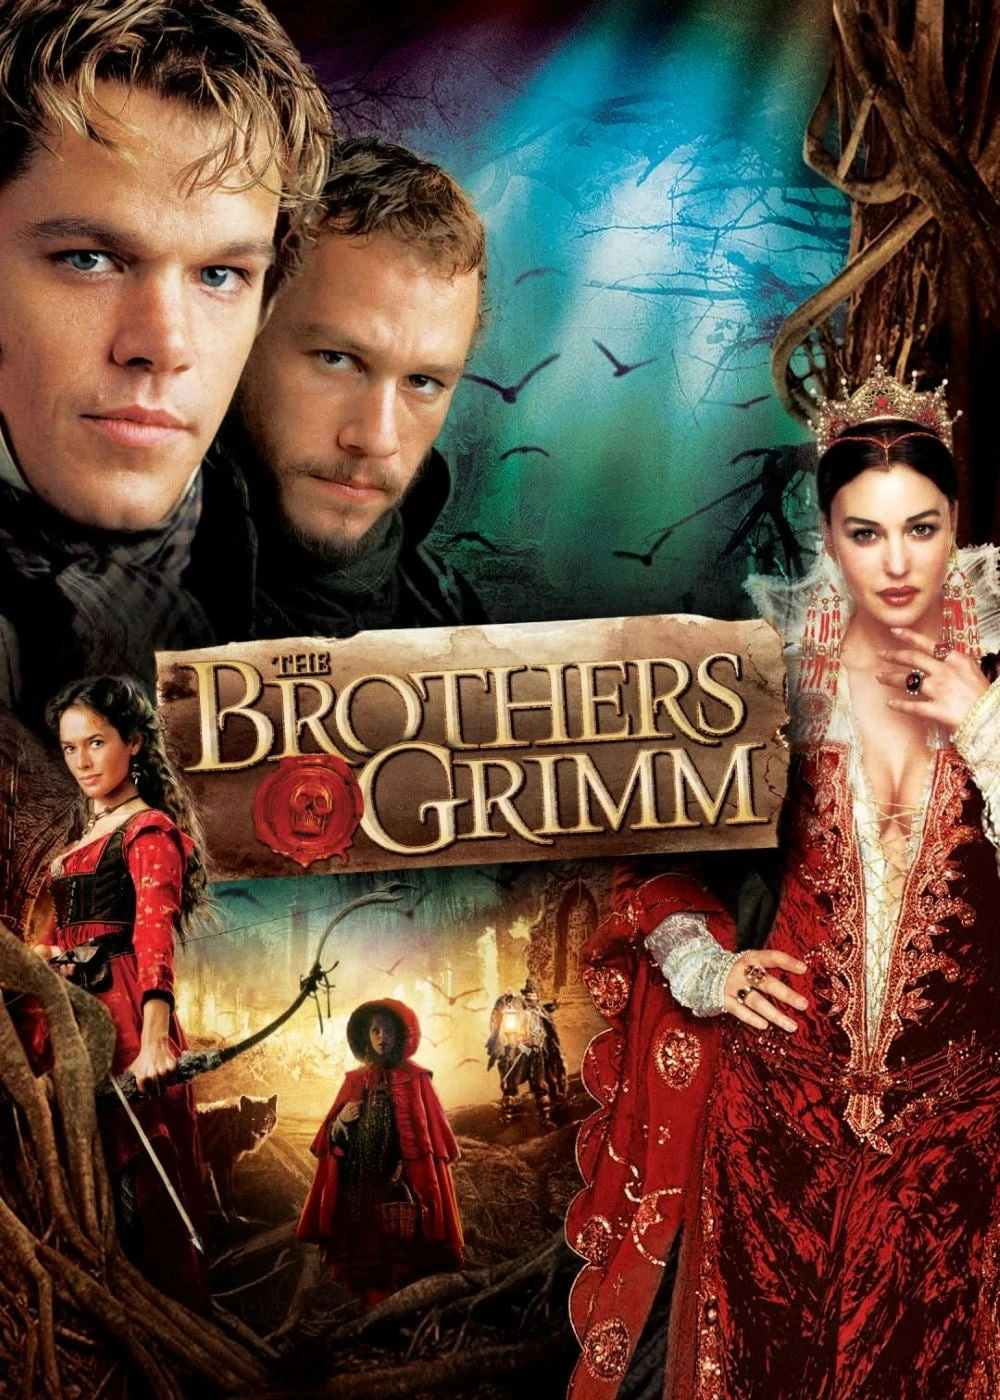 Anh Em Nhà Grimm | The Brothers Grimm (2005)